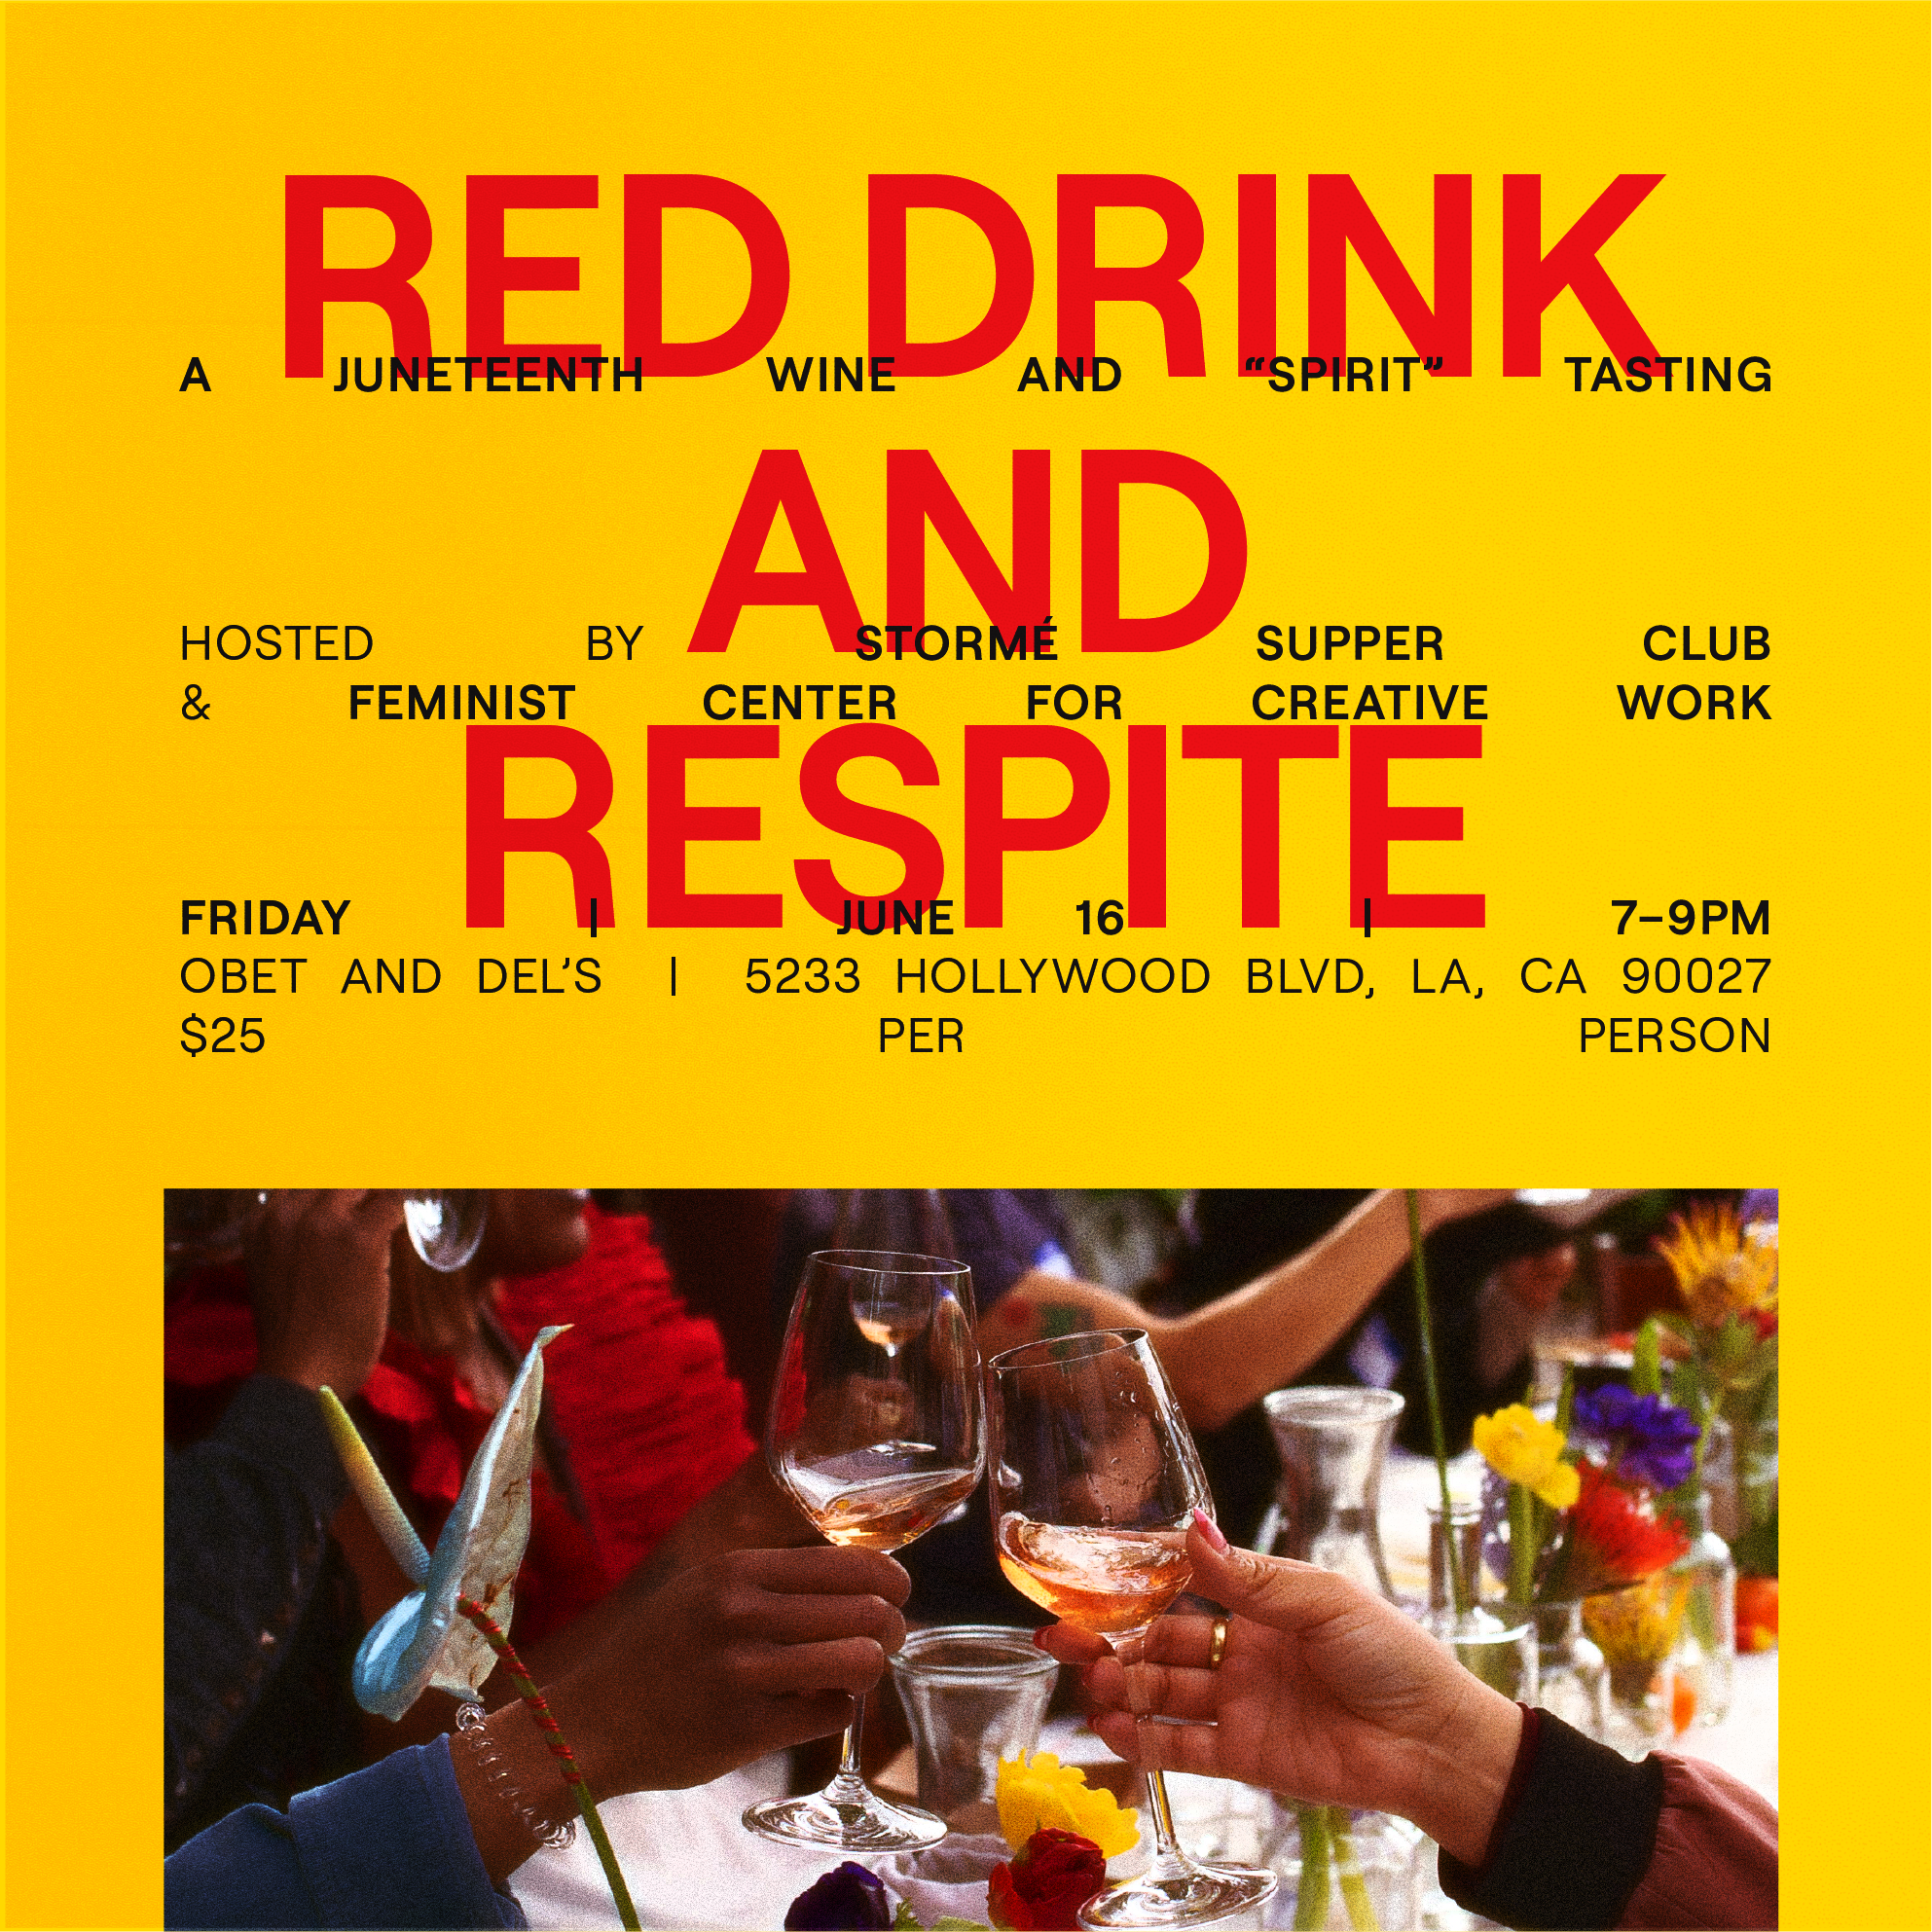 Red Drink And Respite: A Juneteenth Wine and “Spirit” Tasting